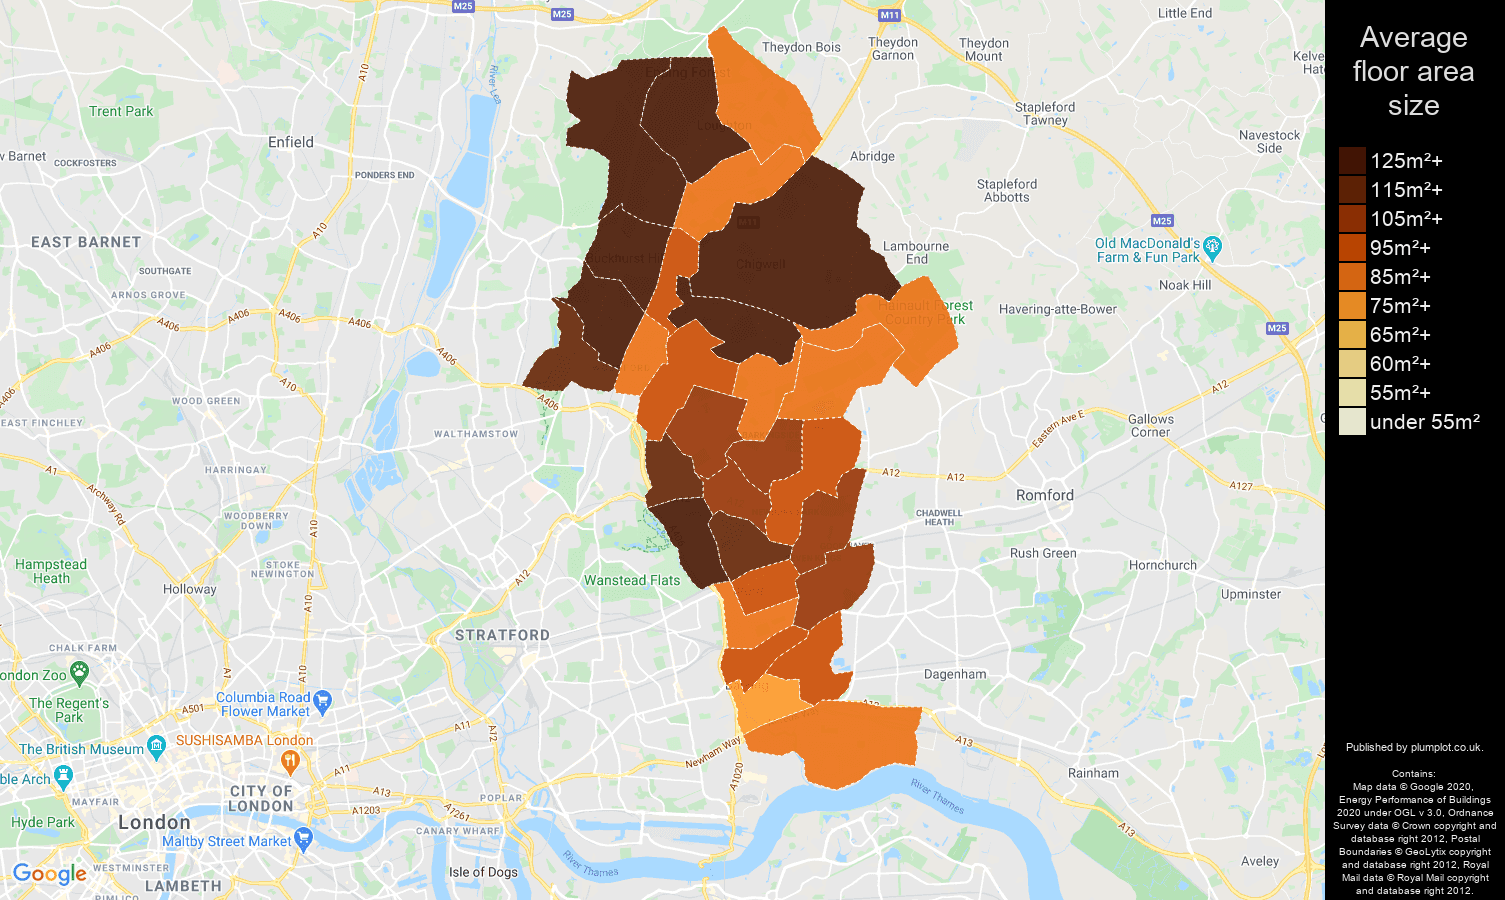 Ilford map of average floor area size of houses